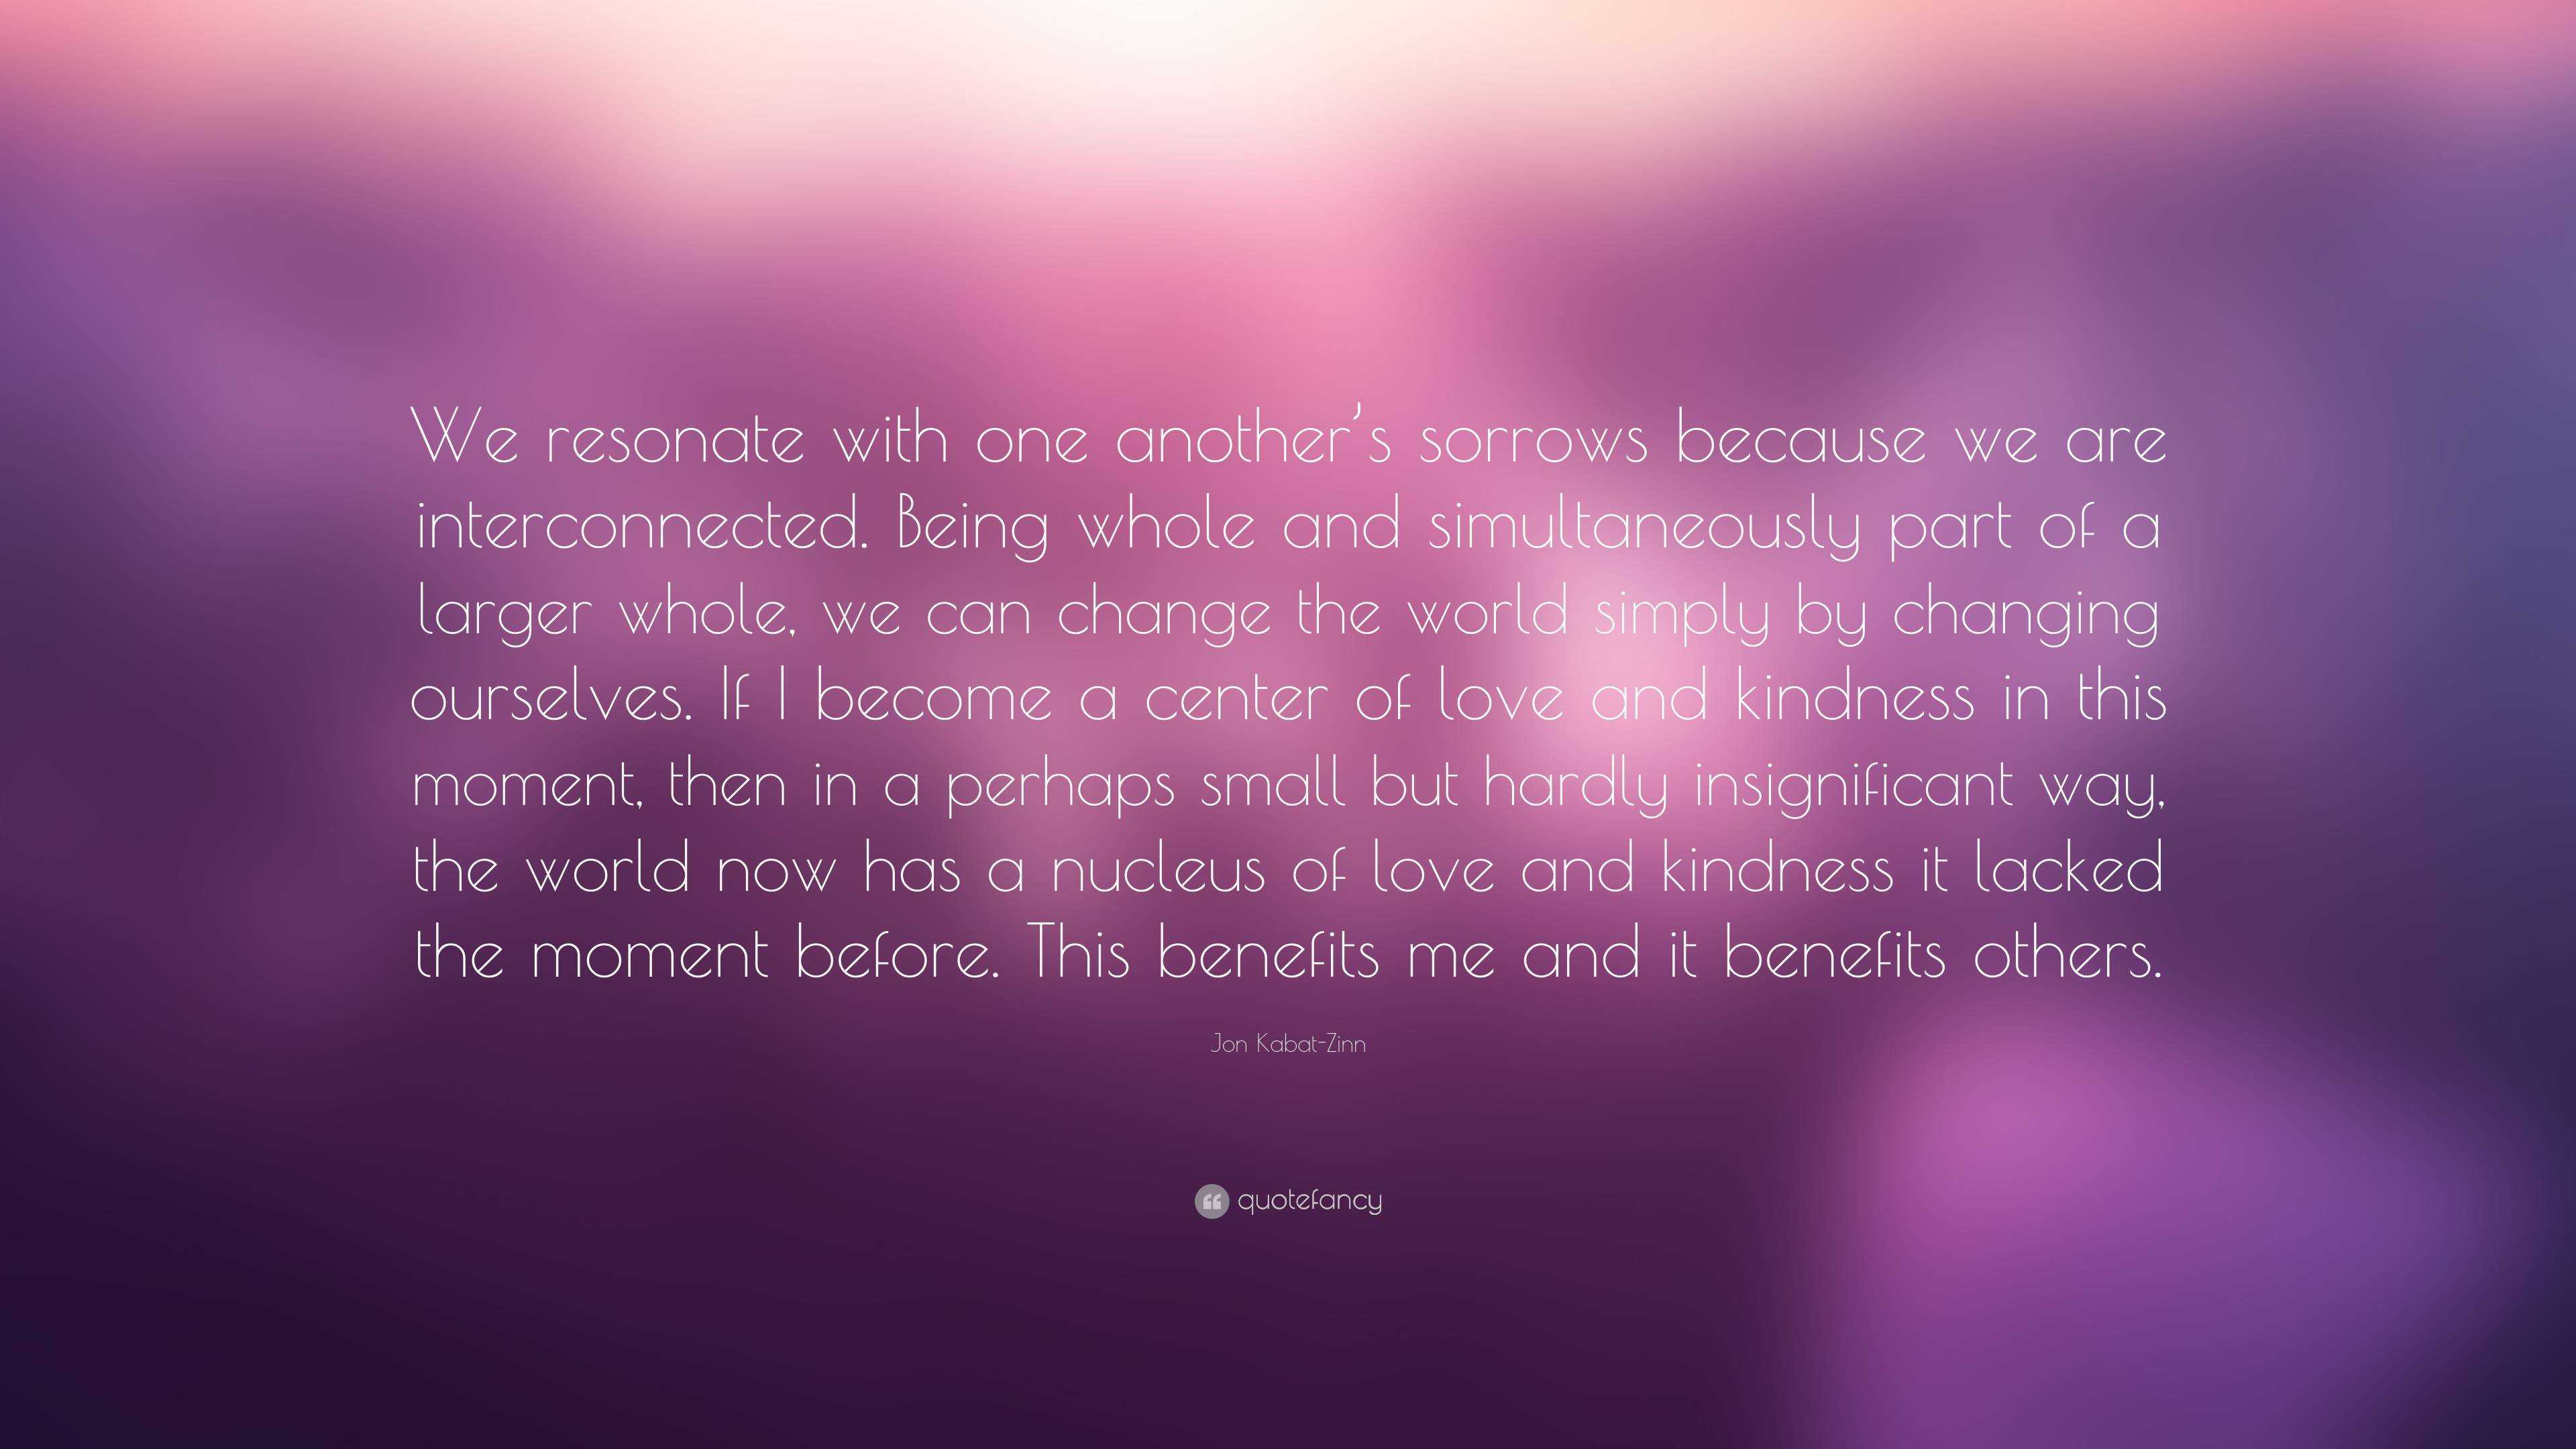 Jon Kabat-Zinn Quote: “We resonate with one another’s sorrows because ...